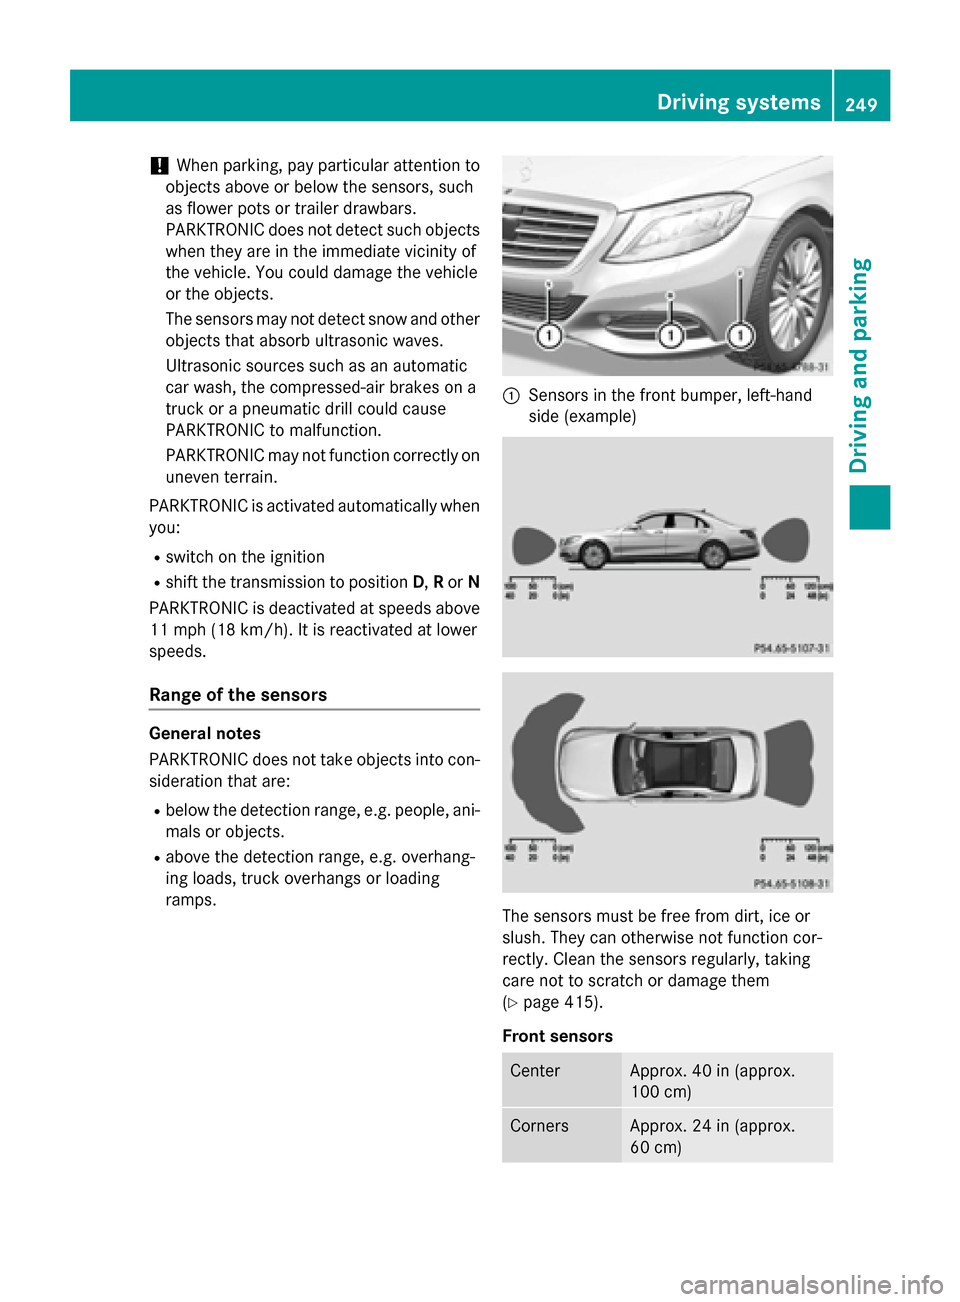 MERCEDES-BENZ S-Class 2015 W222 User Guide !
When parking, pay particular attention to
objects above or below the sensors, such
as flower pots or trailer drawbars.
PARKTRONIC does not detect such objects
when they are in the immediate vicinity